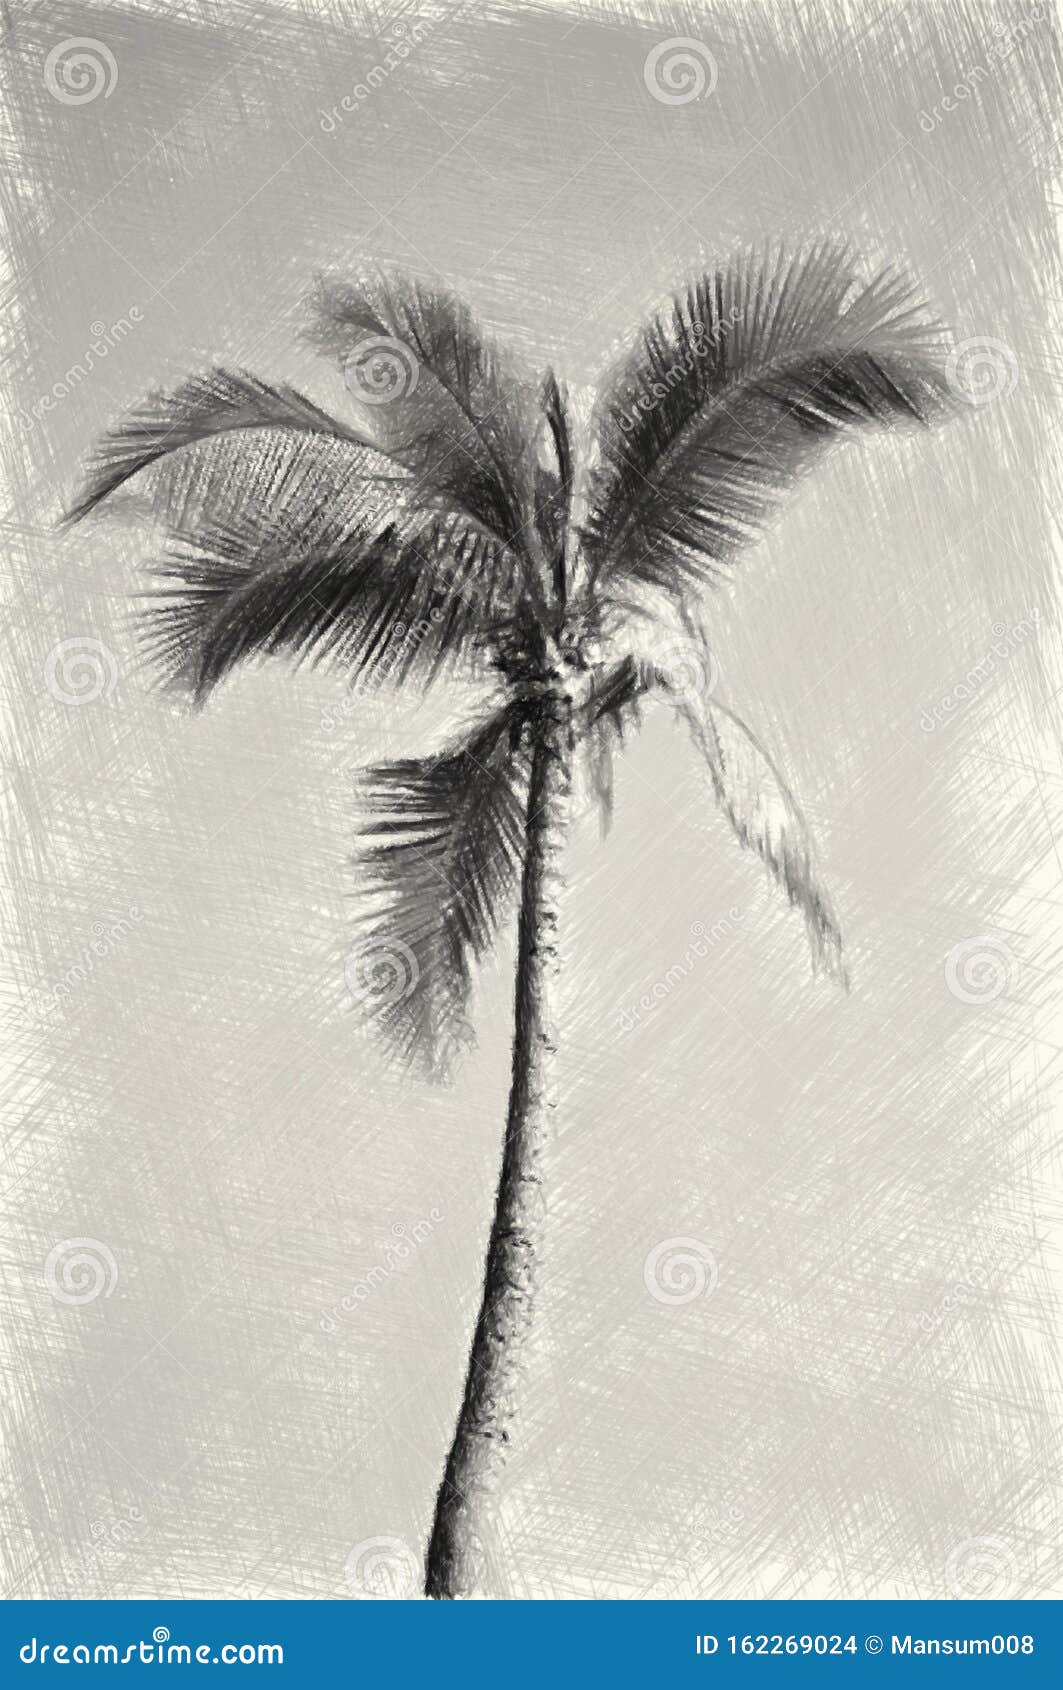 Coconut Pencil Drawing Vector Images (over 150)